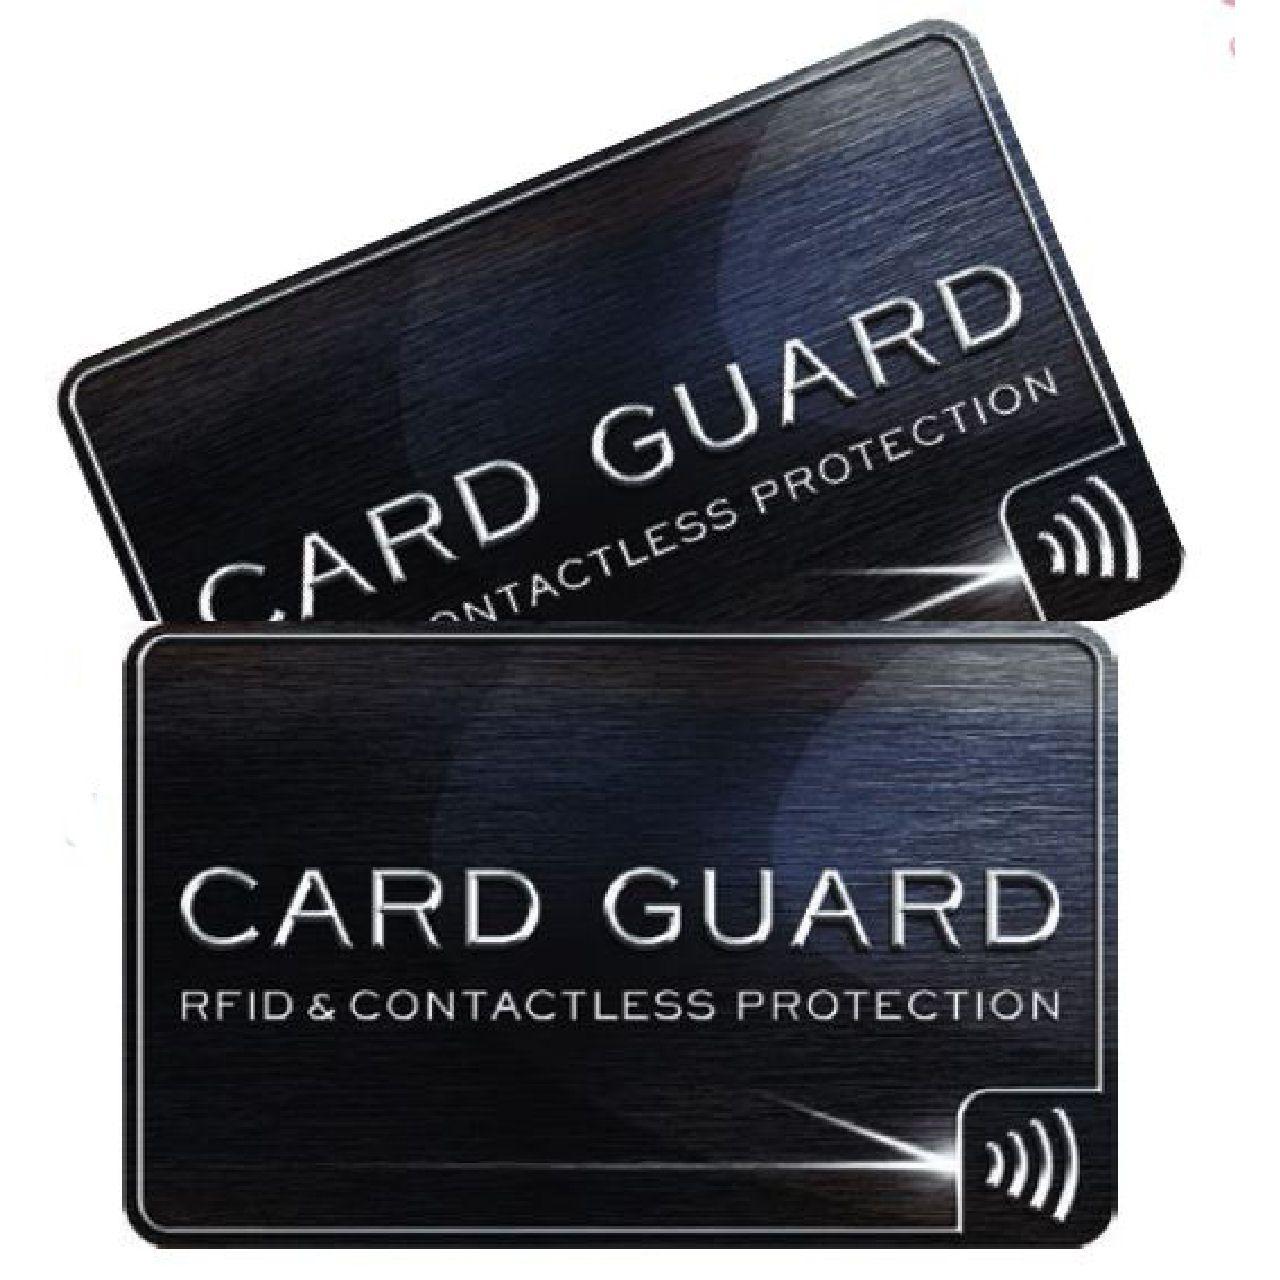 RFID Card Guards for Card Security